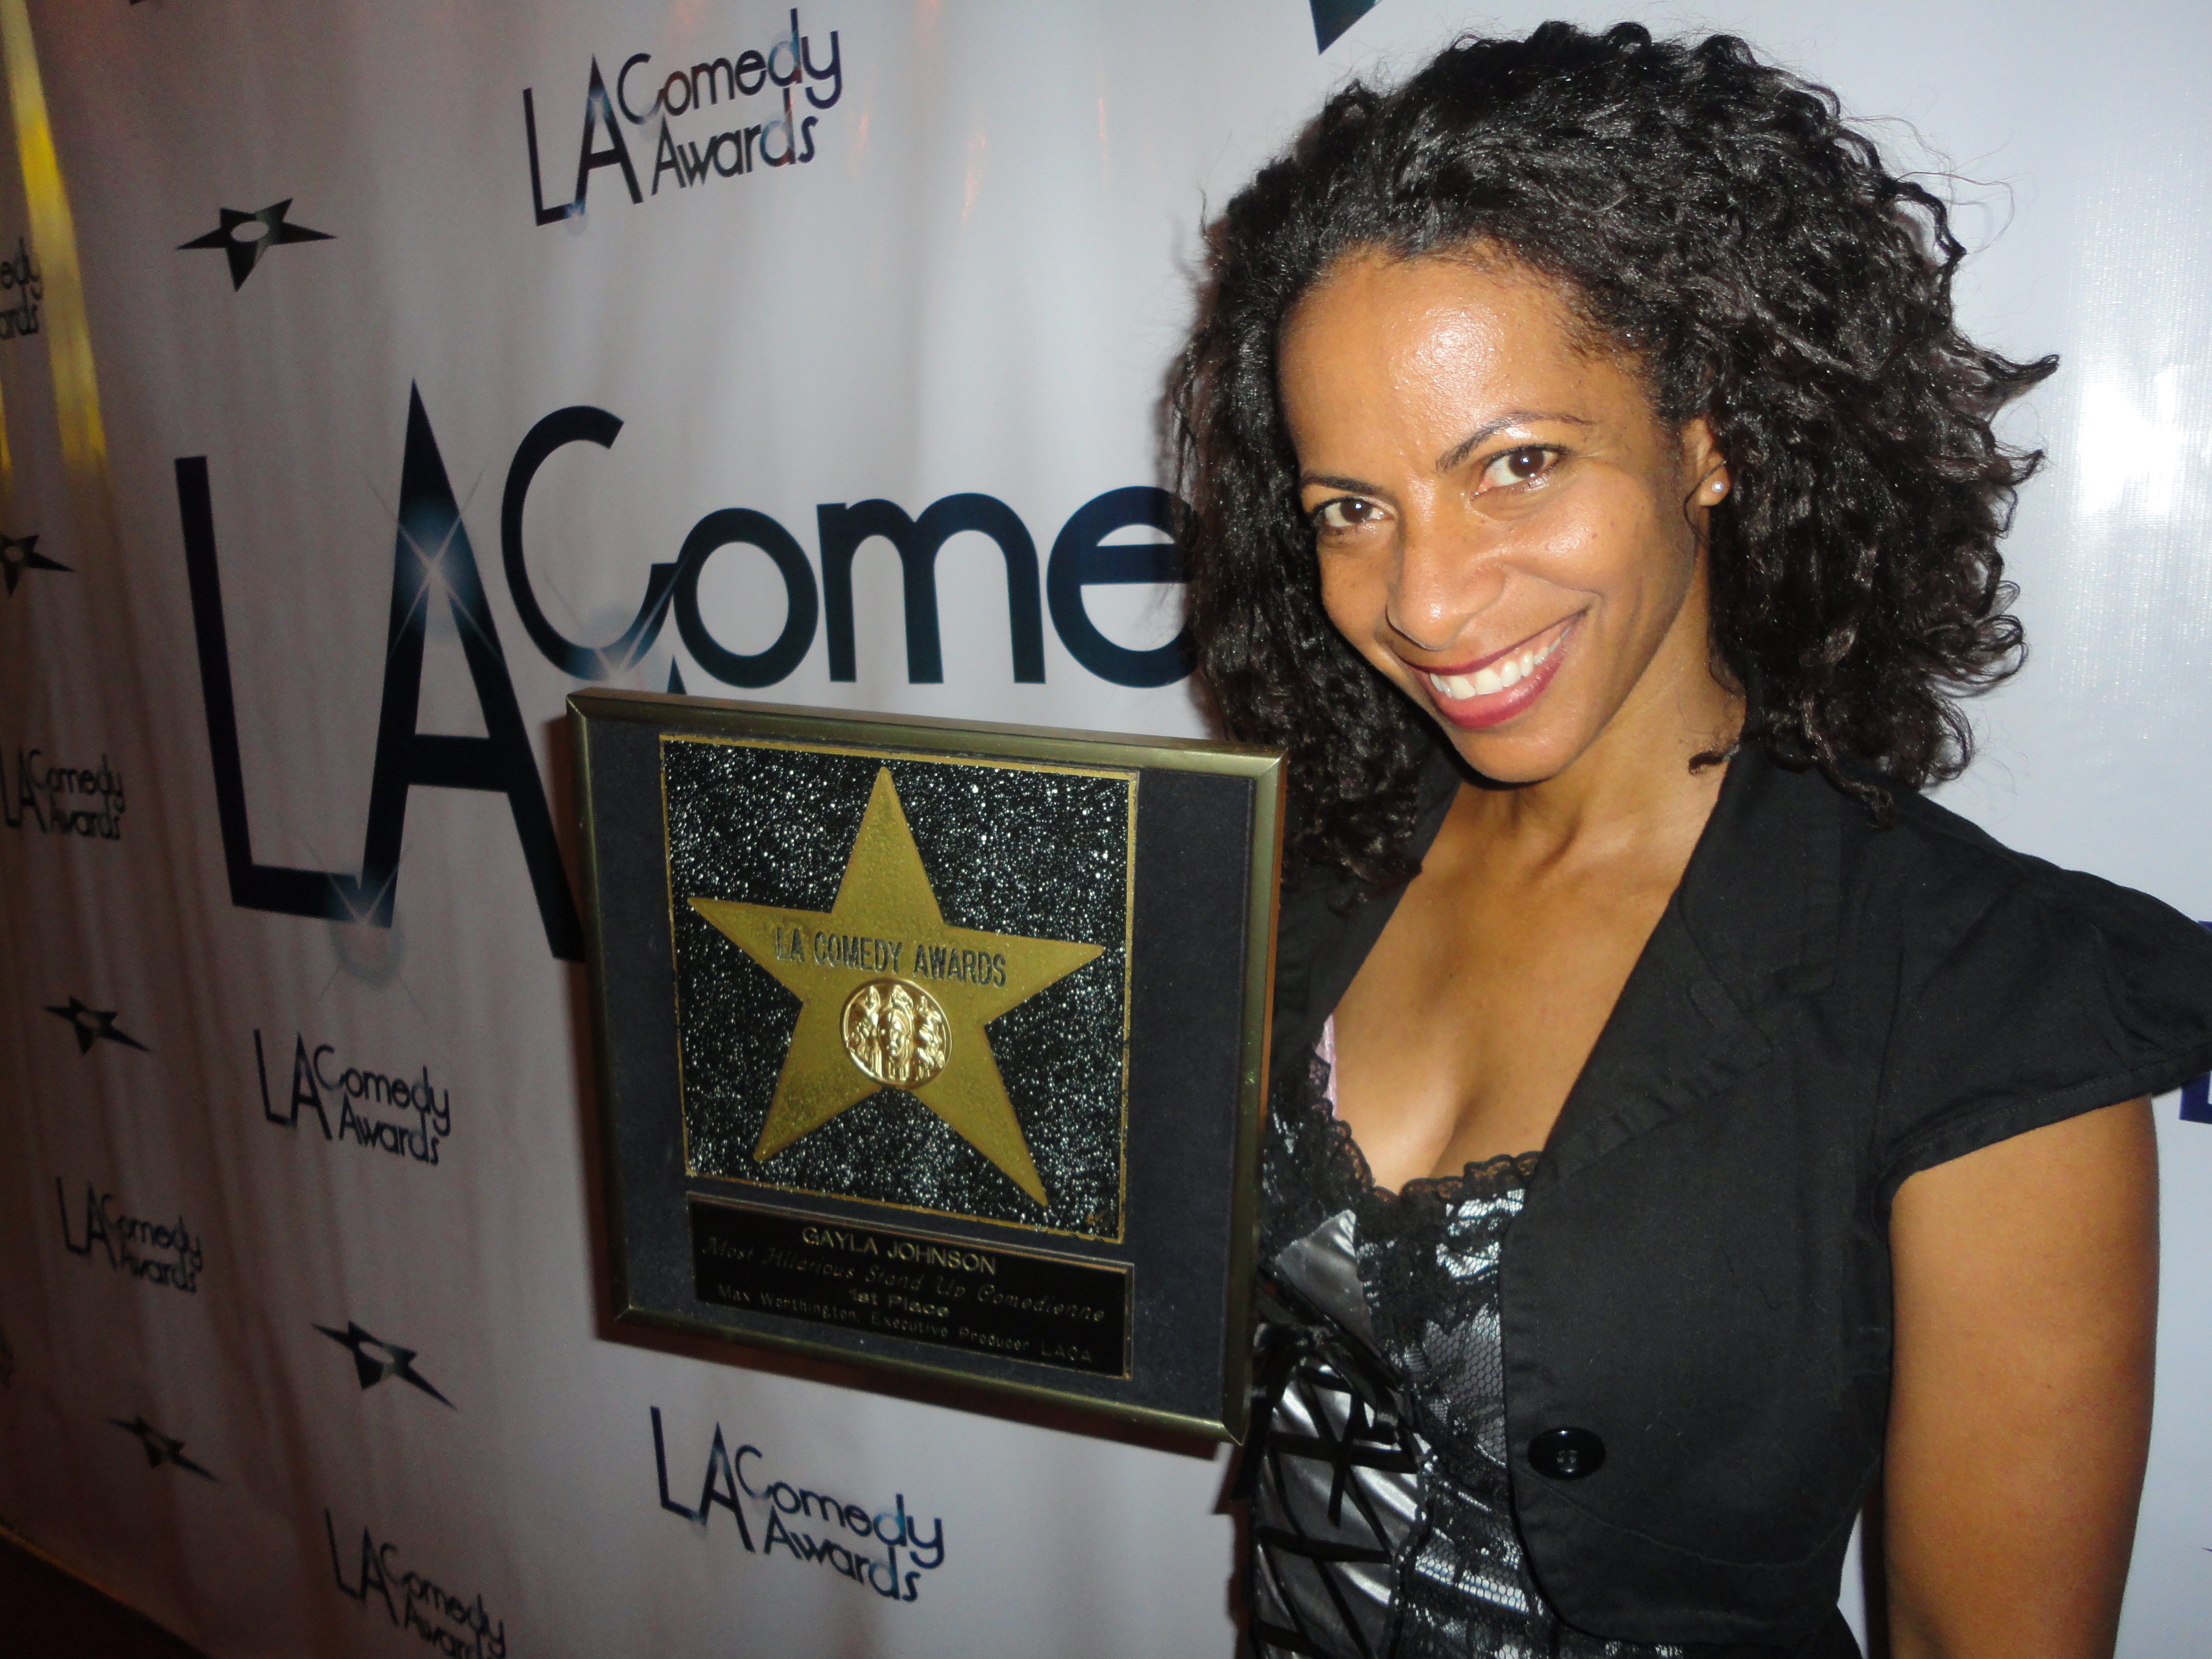 LA Comedy Awards recognizes GAYLA JOHNSON as Most Hilarious Comedienne, 2011, Awarded at the Laugh Factory Hollywood CA